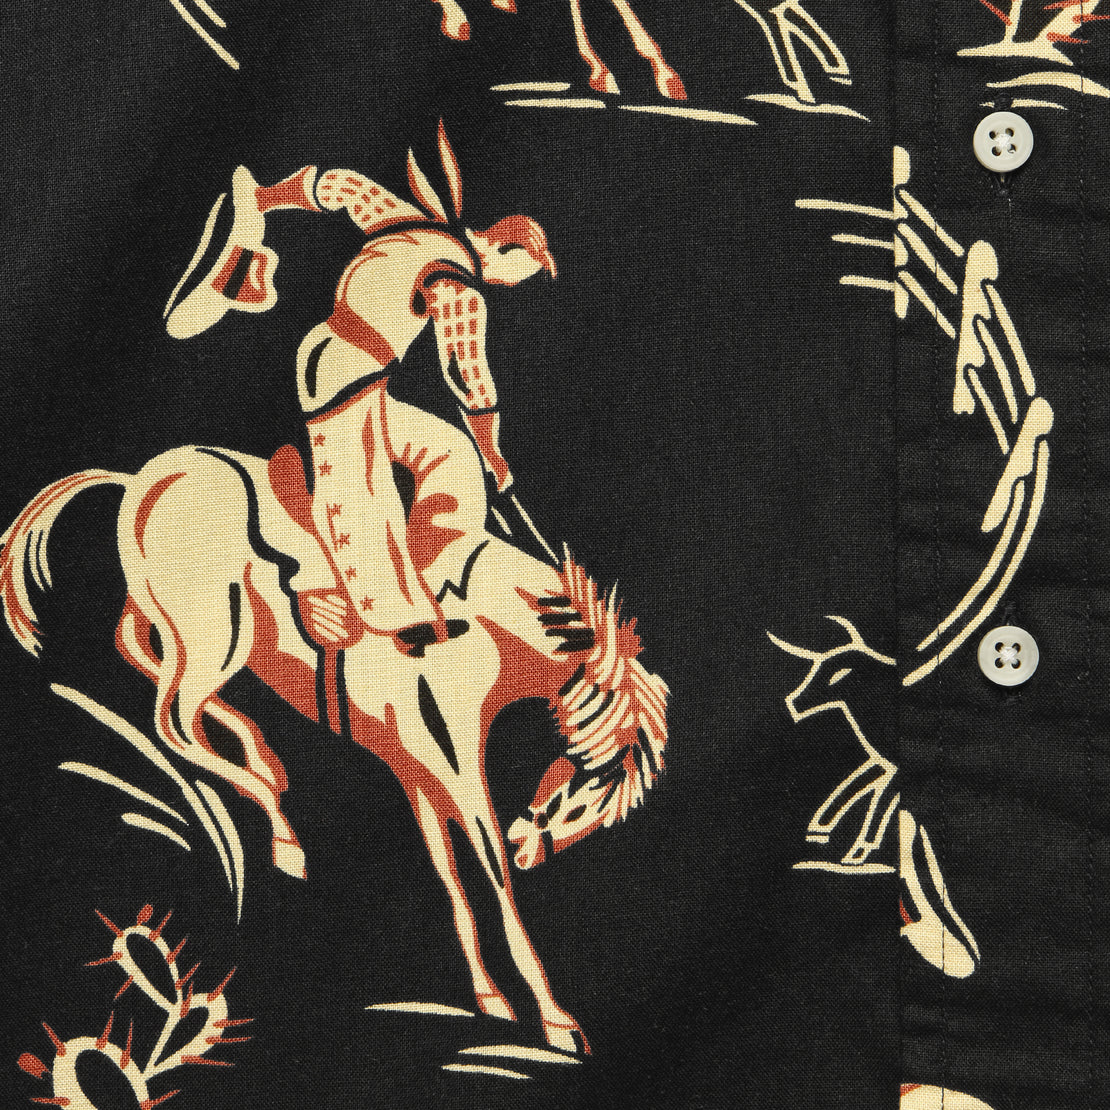 Cowboy Print Shirt - Black - Gitman Vintage - STAG Provisions - Tops - S/S Woven - Other Pattern